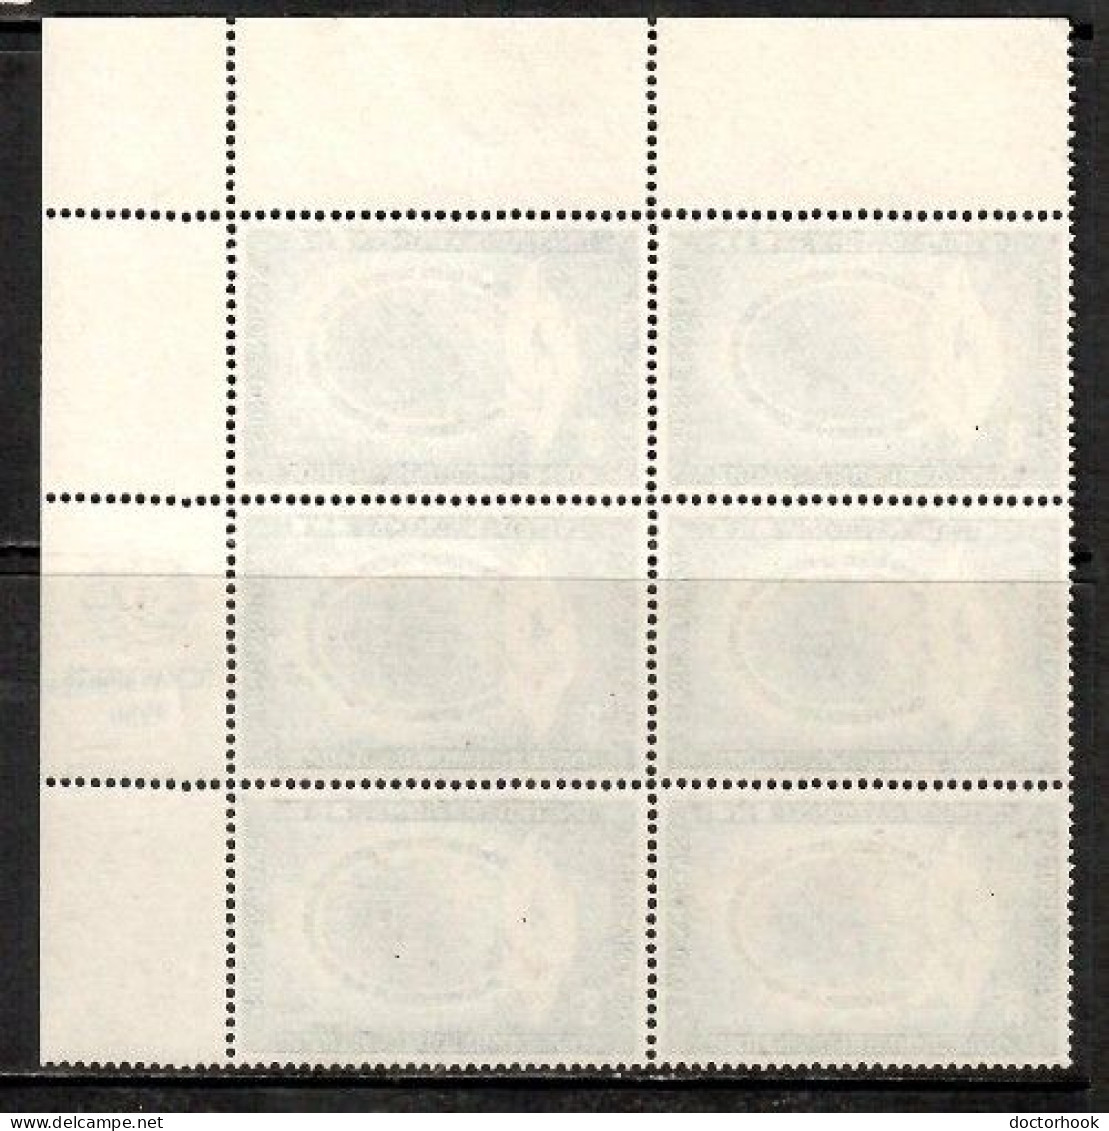 UNITED NATIONS---N.Y.  Scott # 48** MINT NH INSCRIPTION BLOCK Of 6 (CONDITION AS PER SCAN) (LG-1697) - Neufs